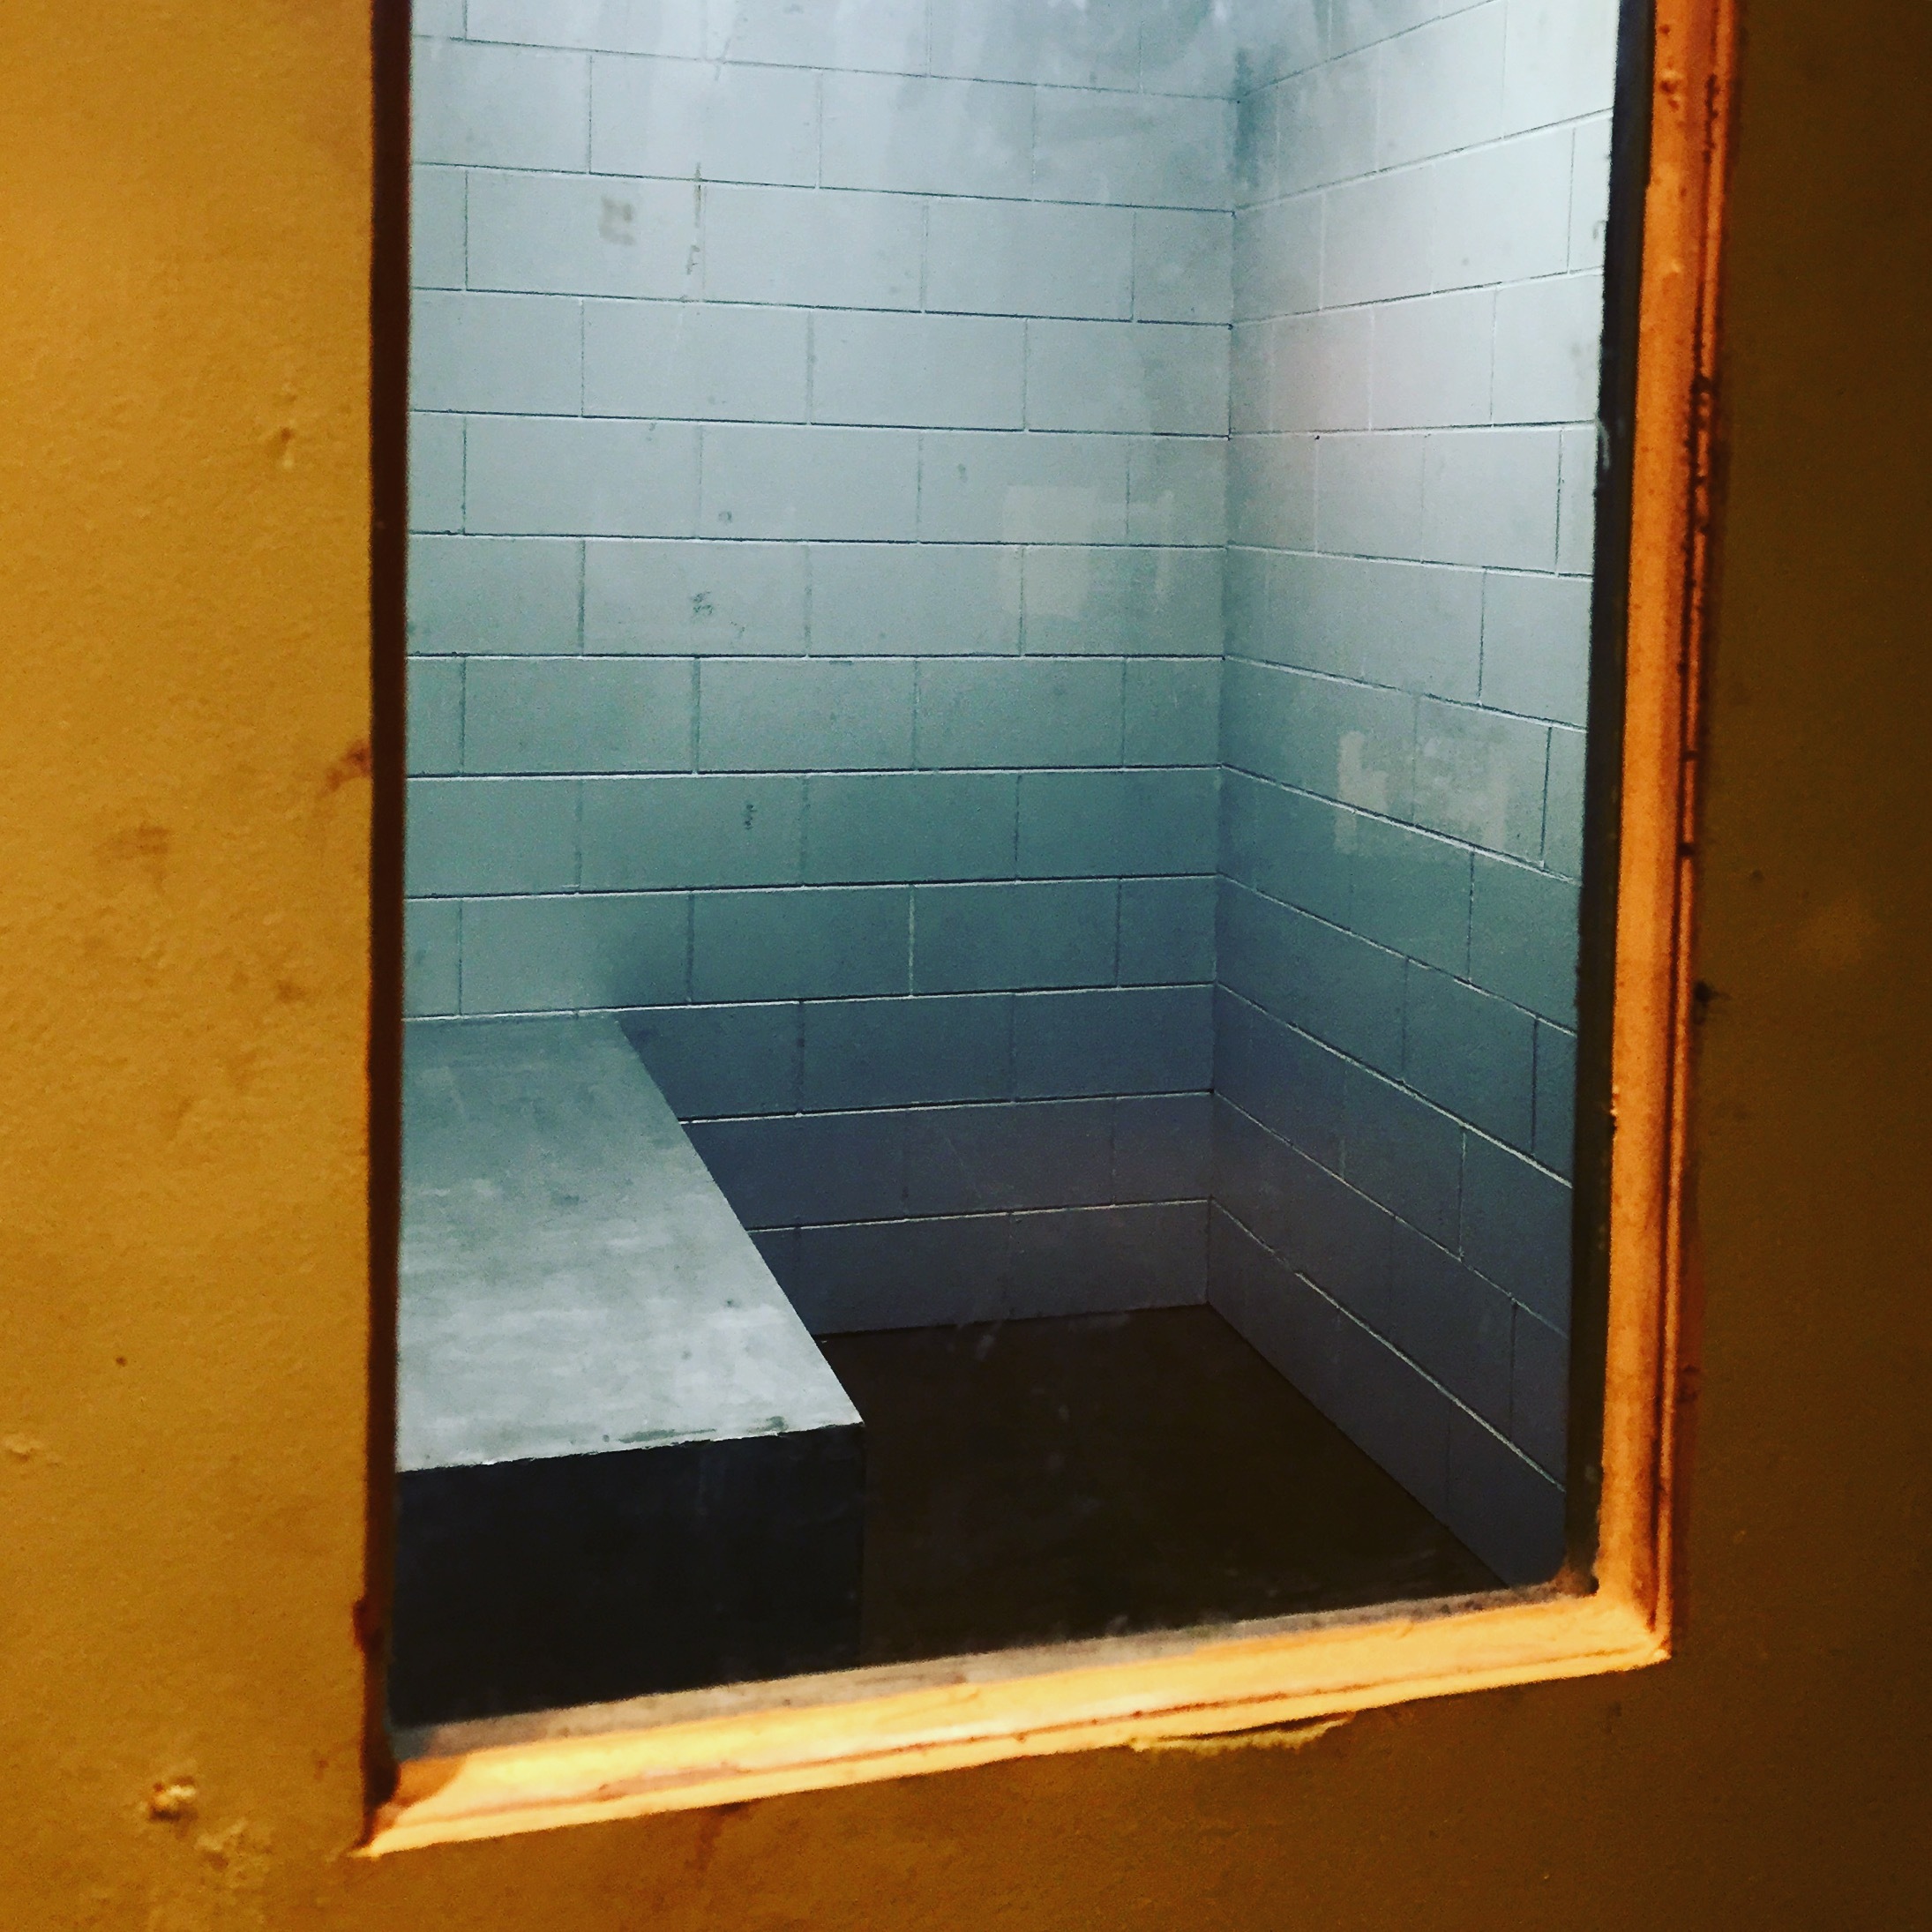 Solitary Confinement Cell Experience